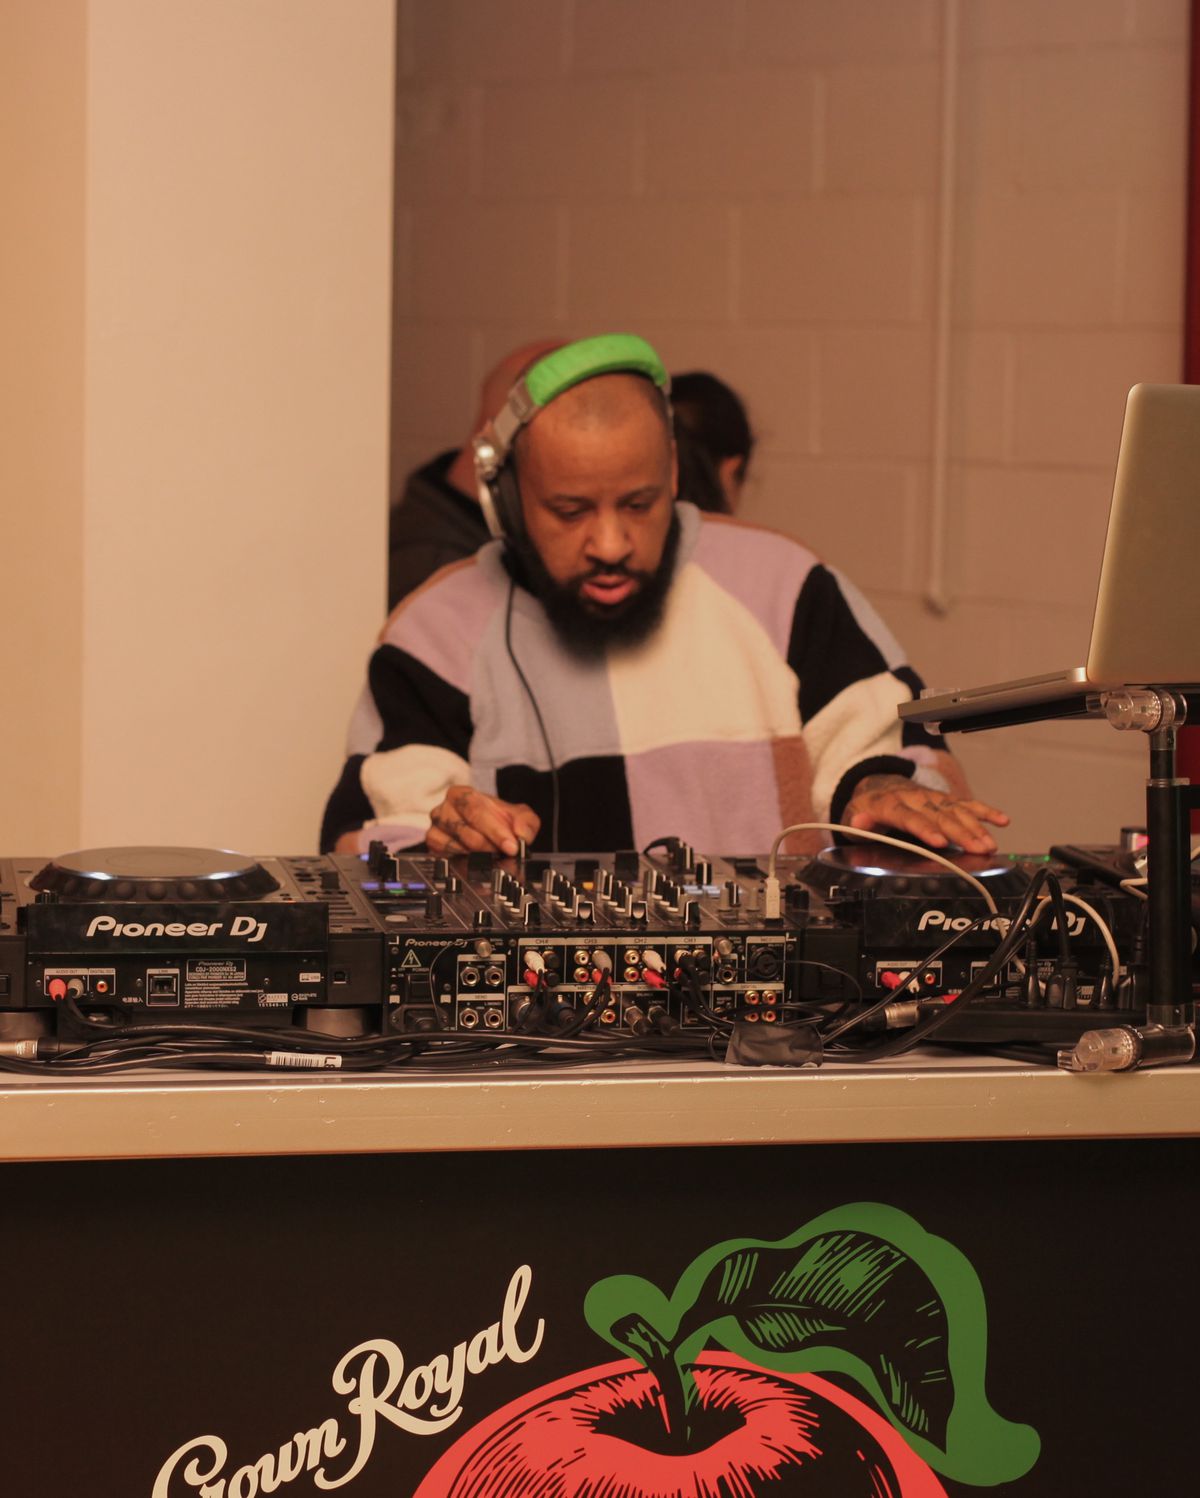 Vic Lloyd, a Chicago-based DJ who had monthly residencies with Soho House Chicago and Emporium Arcade Bar’s Wicker Park location, is feeling the economic fallout from the coronavirus.